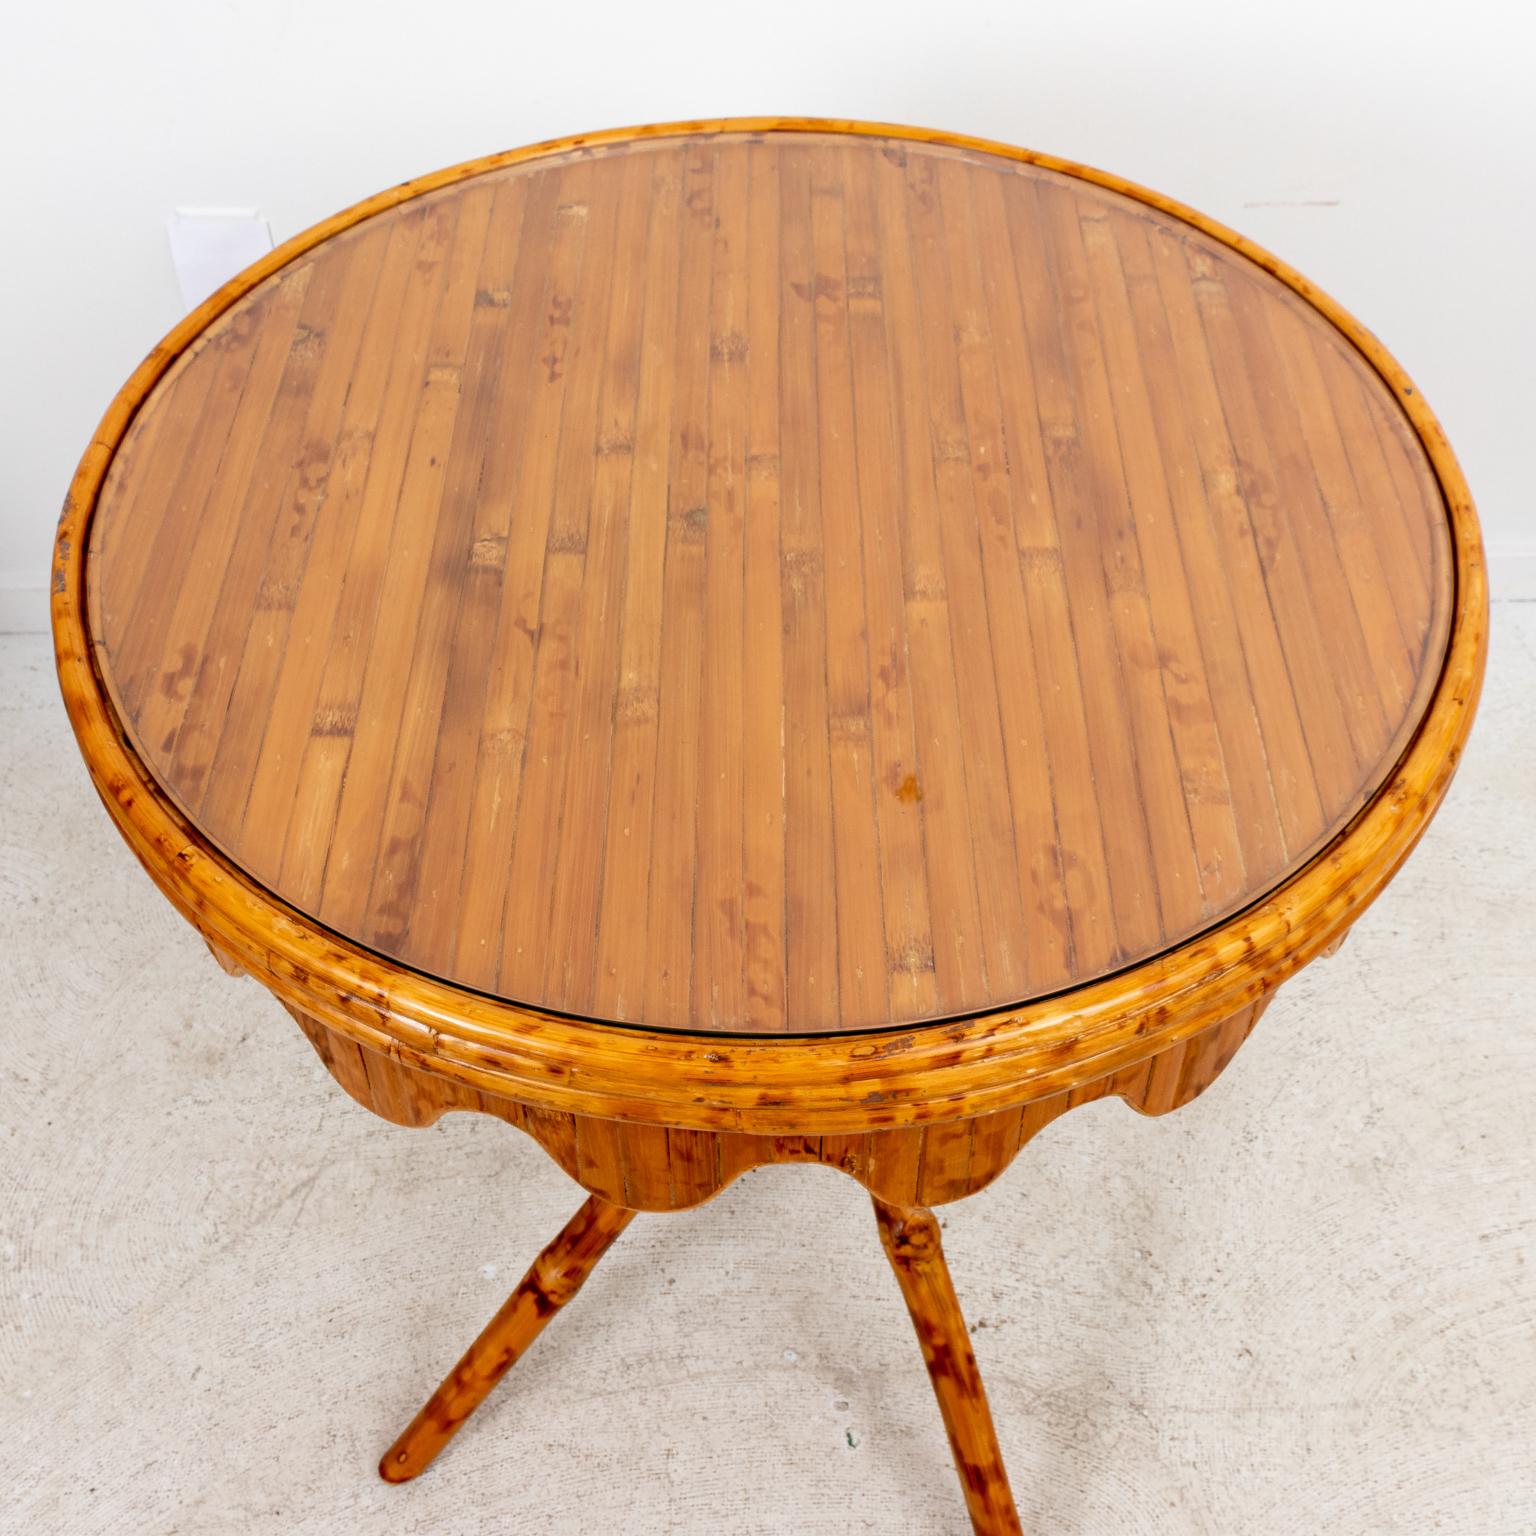 American Palm Beach Regency Mid Century Round Bamboo Glass Top Table